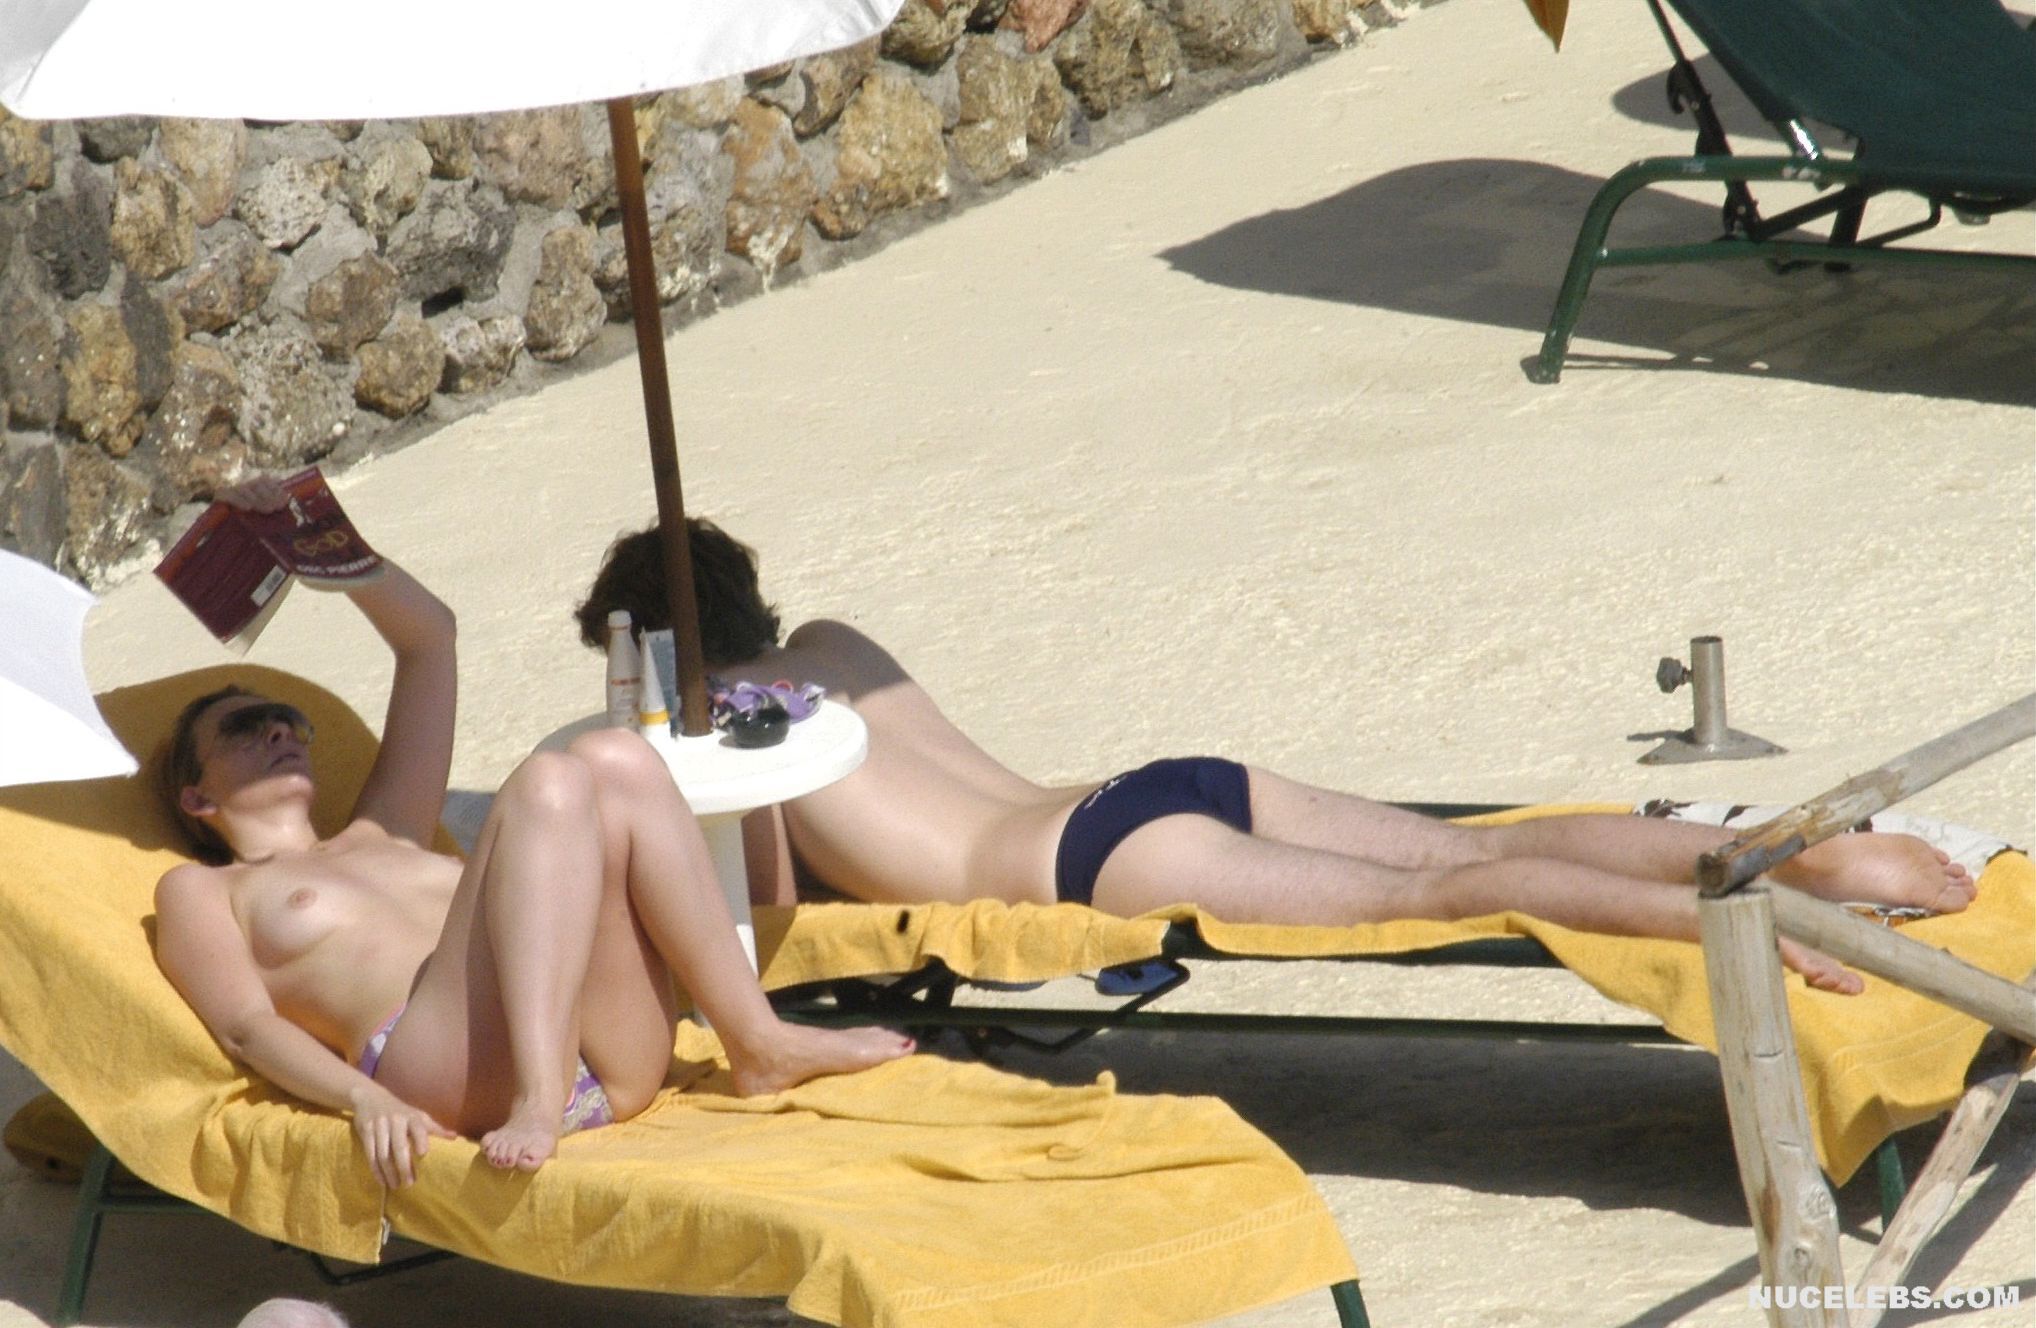 It turns out that Toni Collette loves topless sunbathing. 